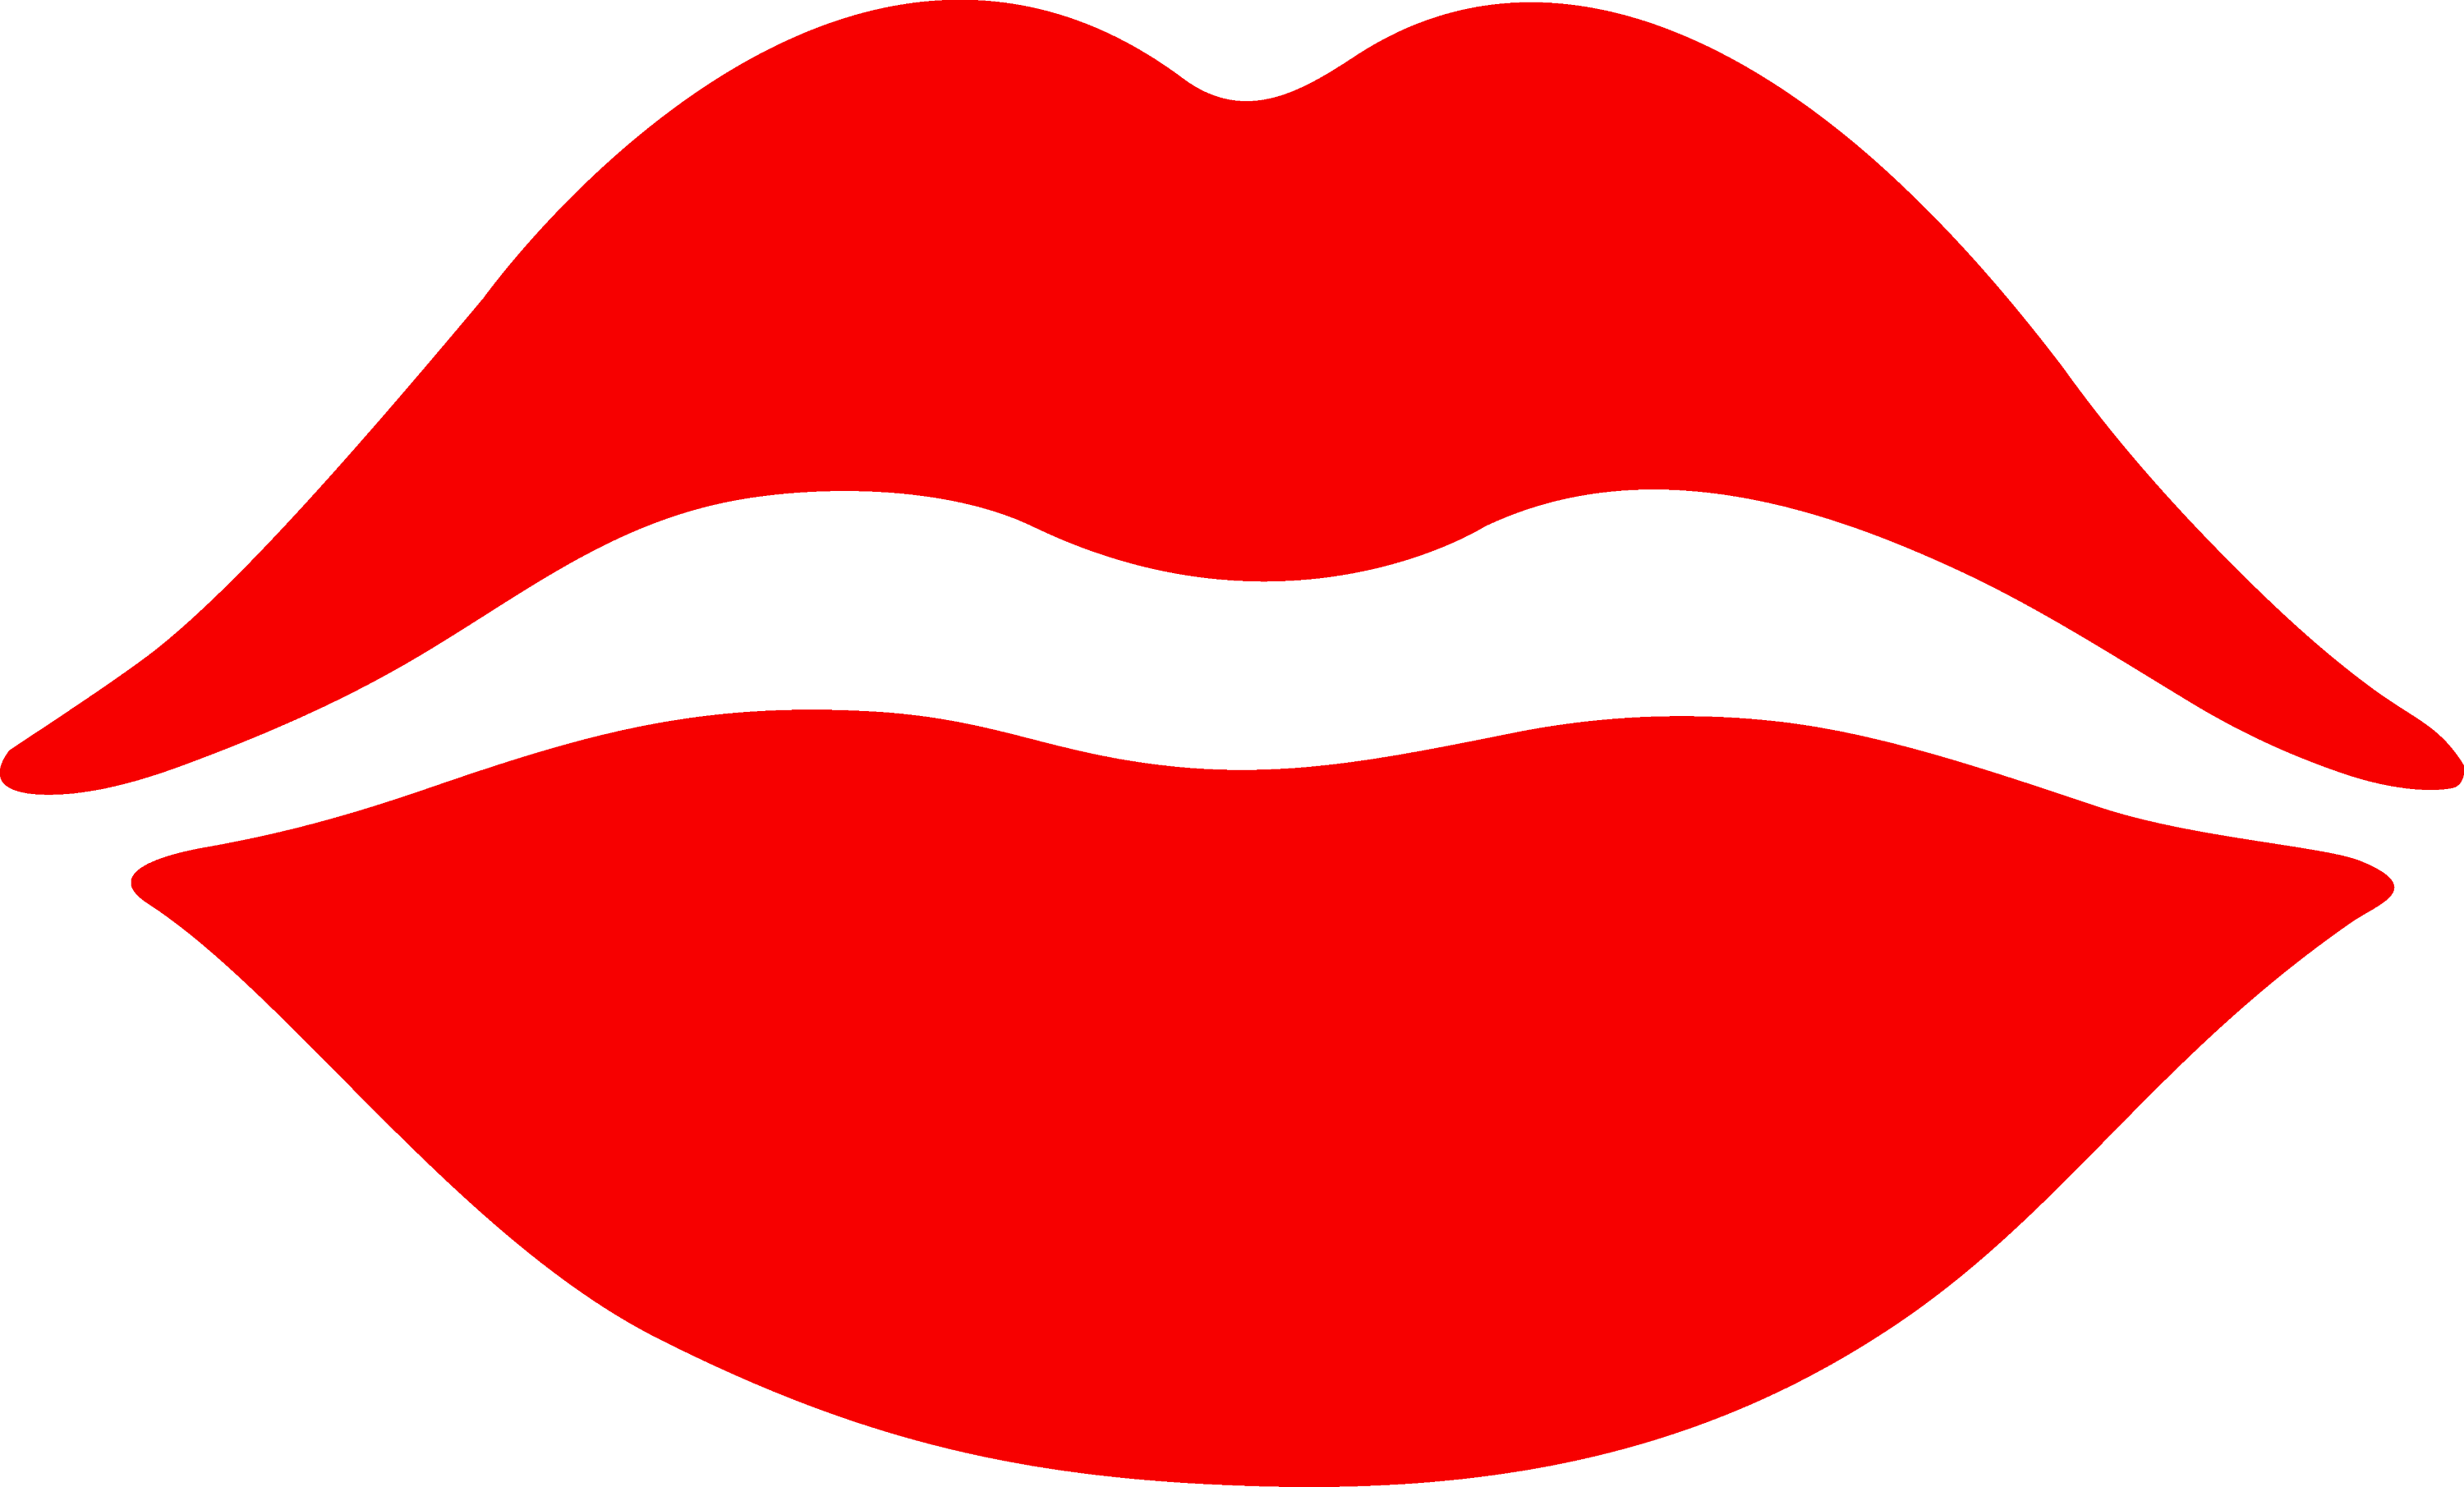 Lips Pictures, Lips Clip Art, Lips Photos, Images ...